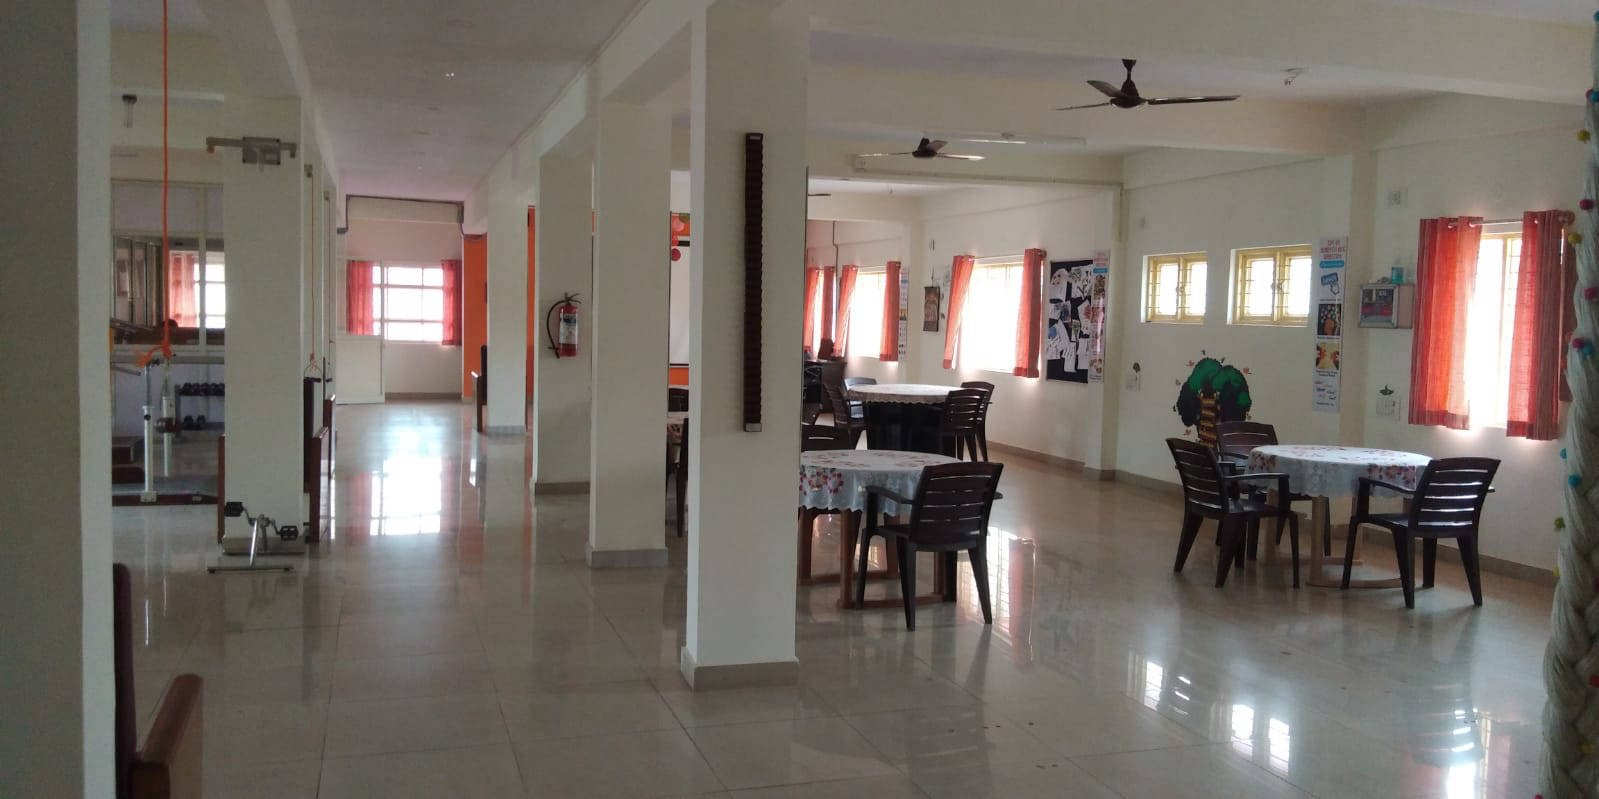 NMT's Day Care Centre is well lit and spacious